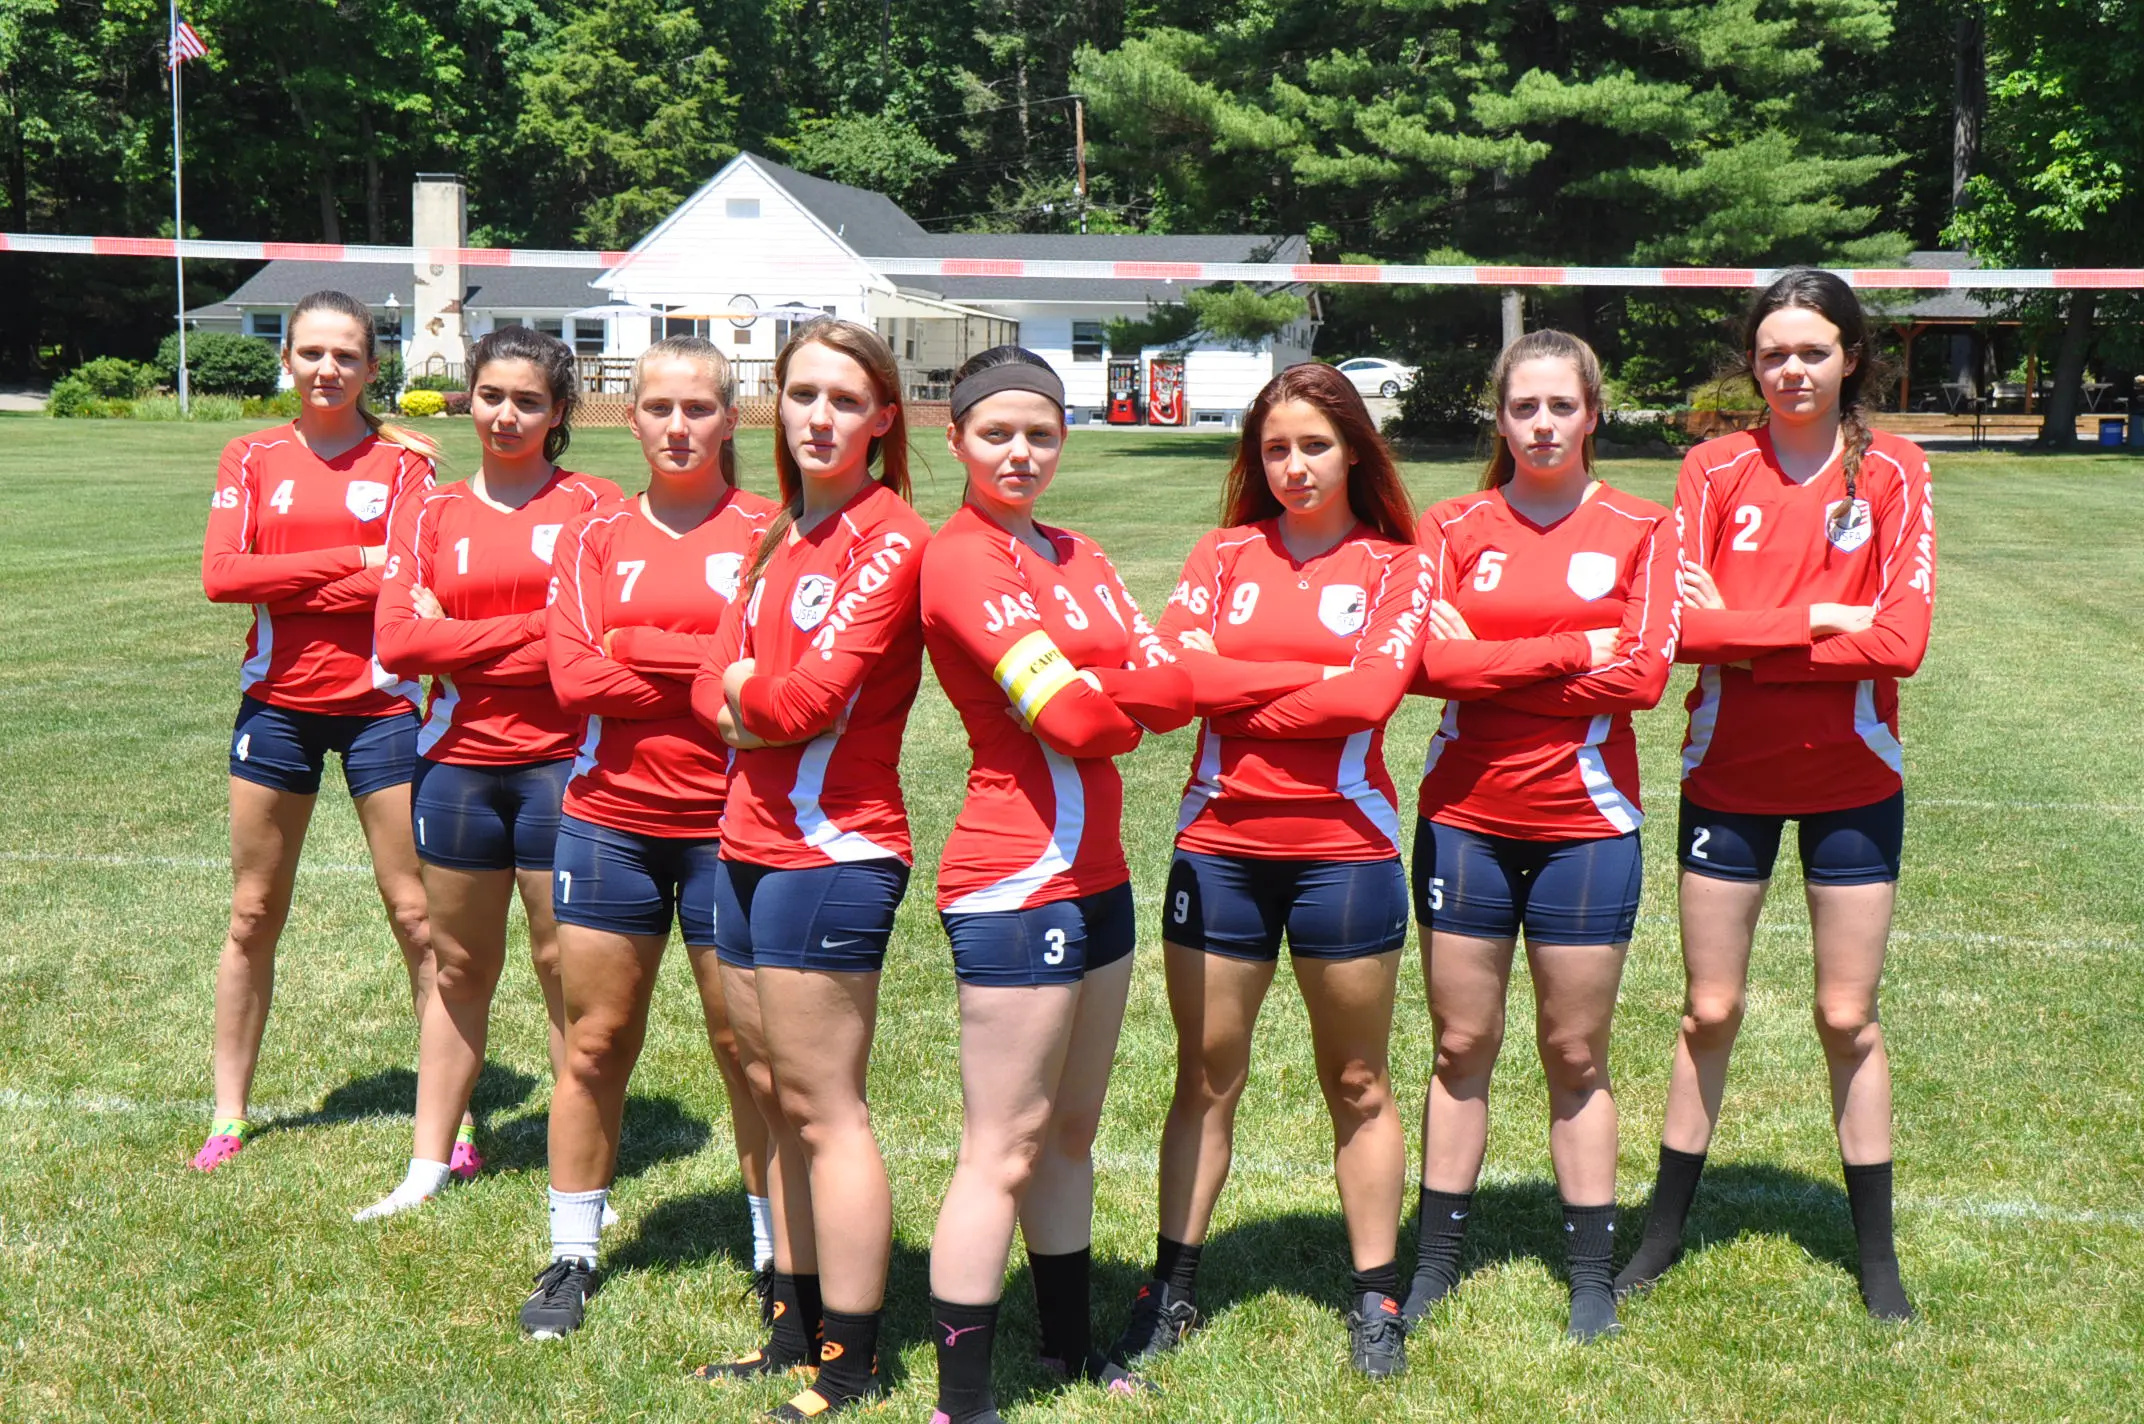 Fistball: USA U18 Girls National Fistball Team, Valerie Houghton, Playing sports, Maplewood, NJ. 2150x1430 HD Wallpaper.